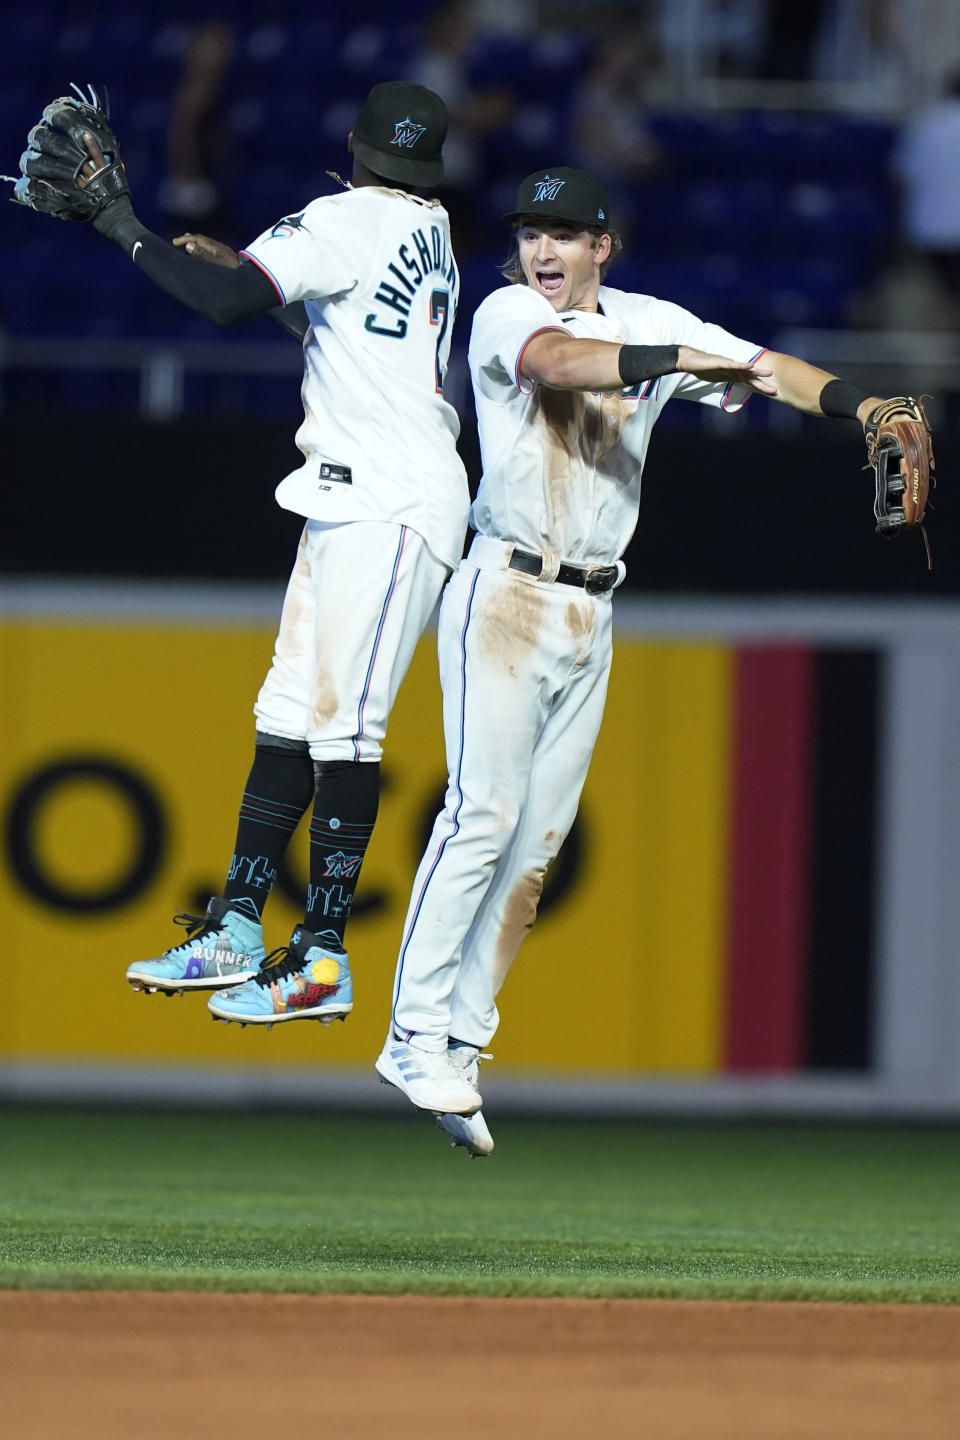 Miami Marlins second baseman Jazz Chisholm Jr., left, and right fielder Luke Williams celebrate after the Marlins beat the Colorado Rockies 3-2 during a baseball game, Thursday, June 23, 2022, in Miami. (AP Photo/Wilfredo Lee)